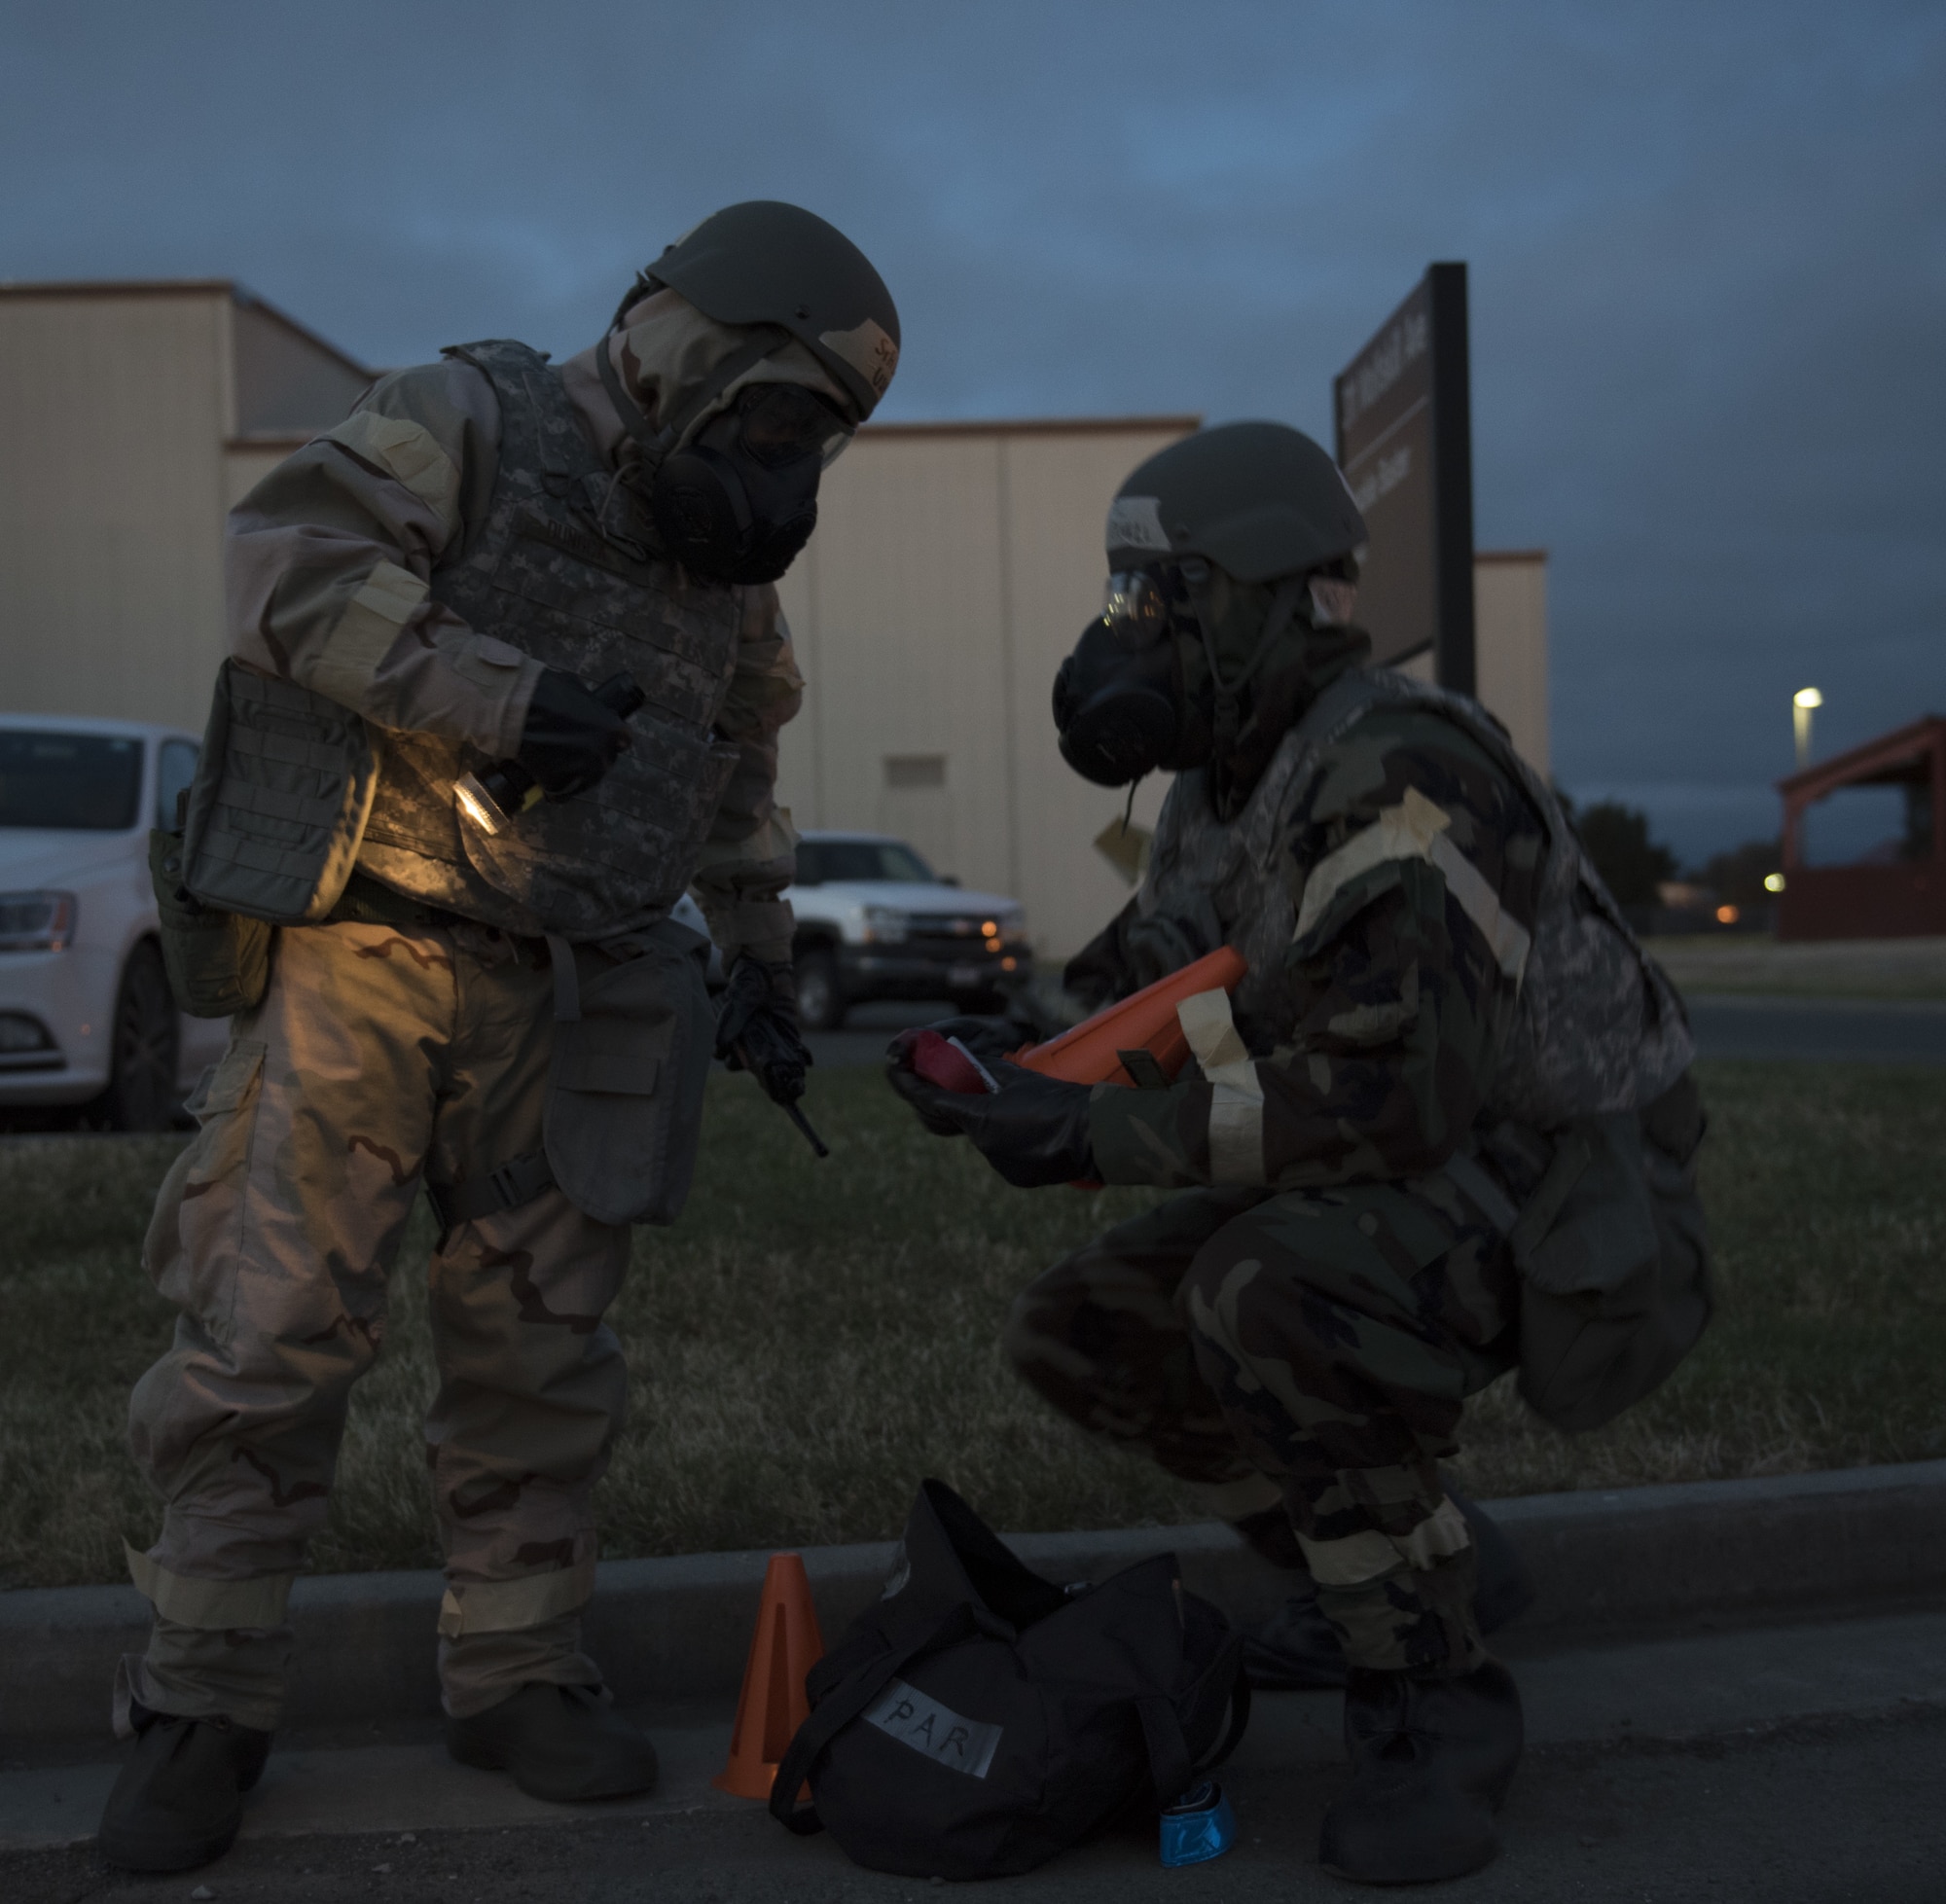 U.S. Air Force Senior Airman Charles Dungca, left, and Airman 1st Class Kelvin Powell, right, 60th Medical Group bioenvironmental specialists, perform a post attack reconnaissance sweep May 7, 2019, during a readiness exercise at Travis Air Force Base, California. The base conducted a week-long exercise to evaluate Travis’ ability to execute and sustain rapid global mobility operations. (U.S. Air Force photo by Staff Sgt. Amber Carter)